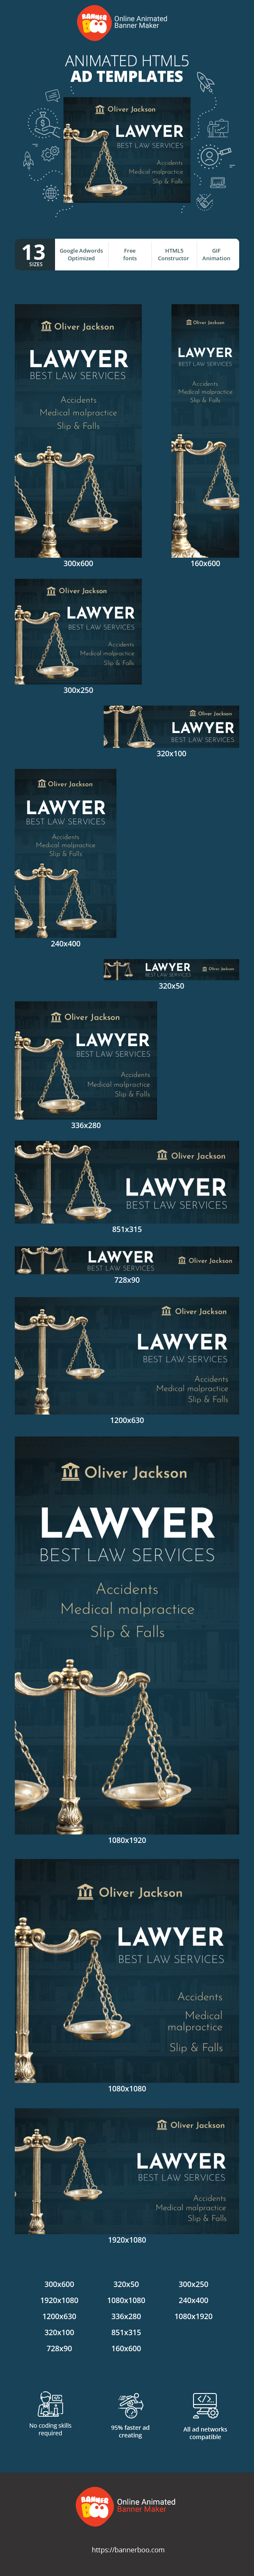 Banner ad template — Lawyer Best Law Services — Accidents, Medical Malpractice, Slip & Falls